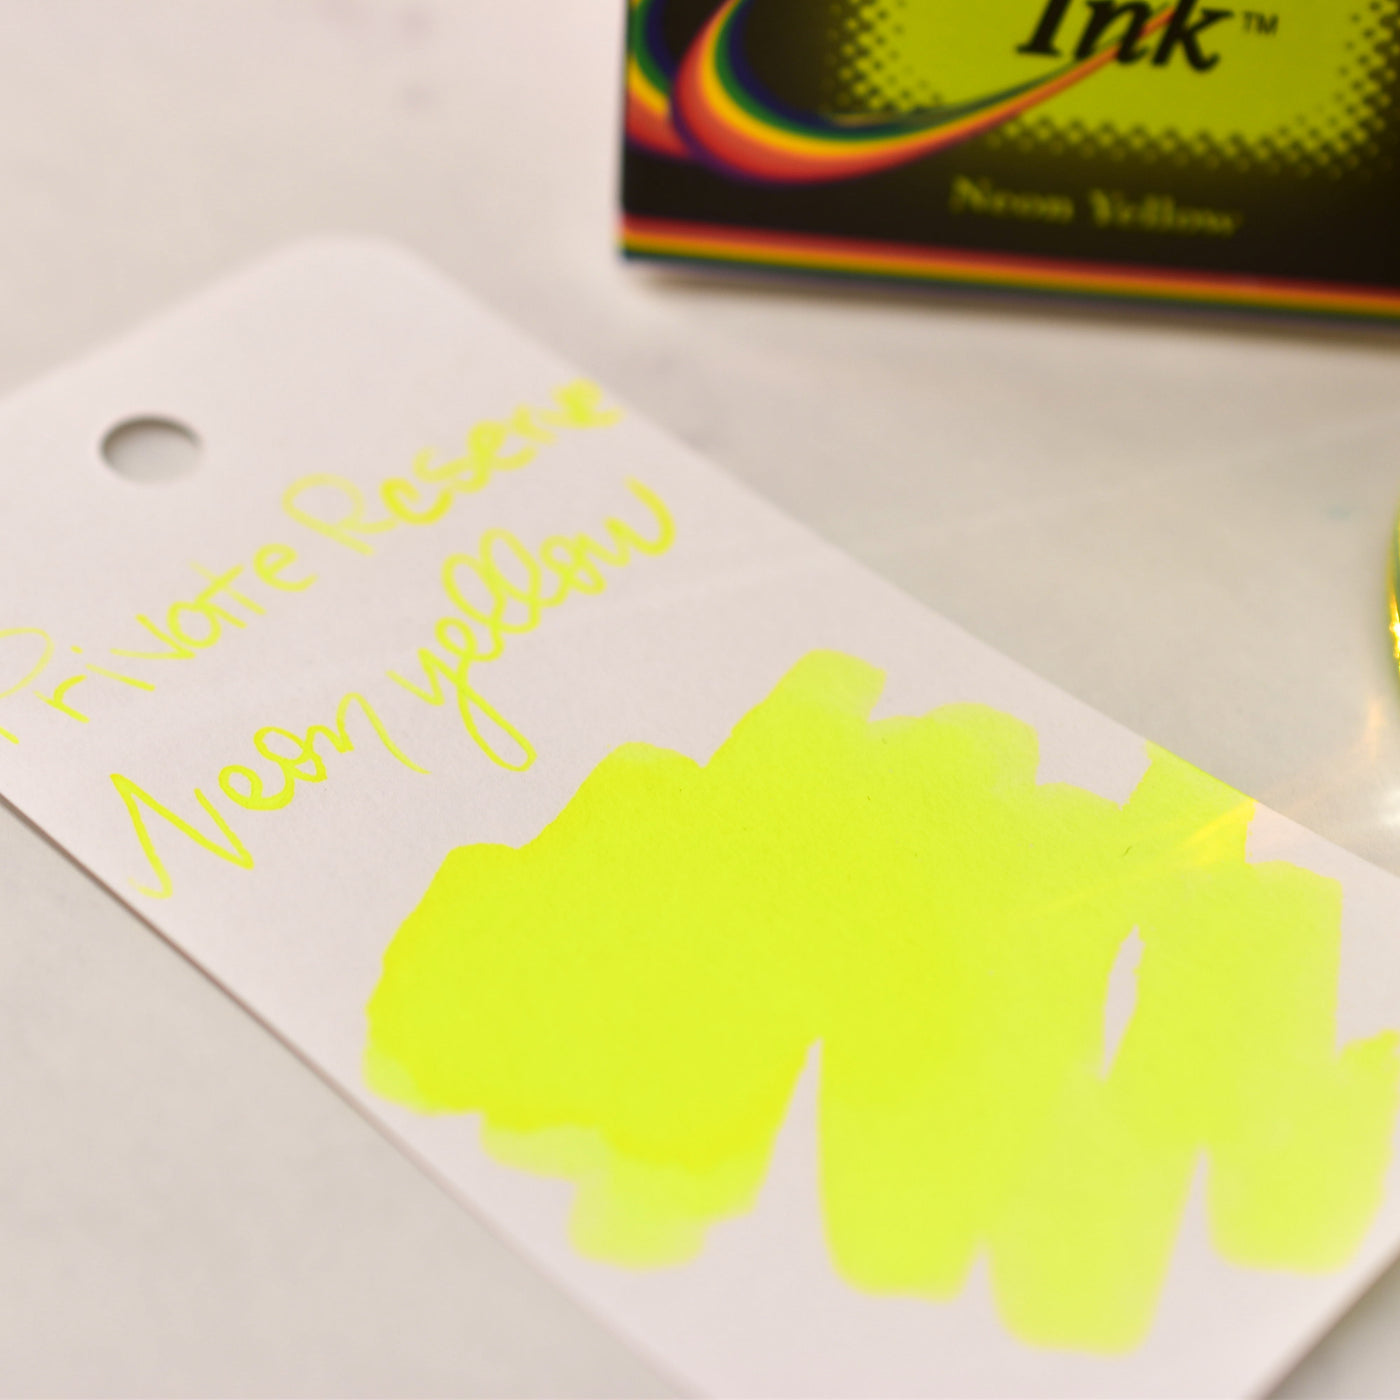 Private Reserve Neon Yellow Ink Bottle